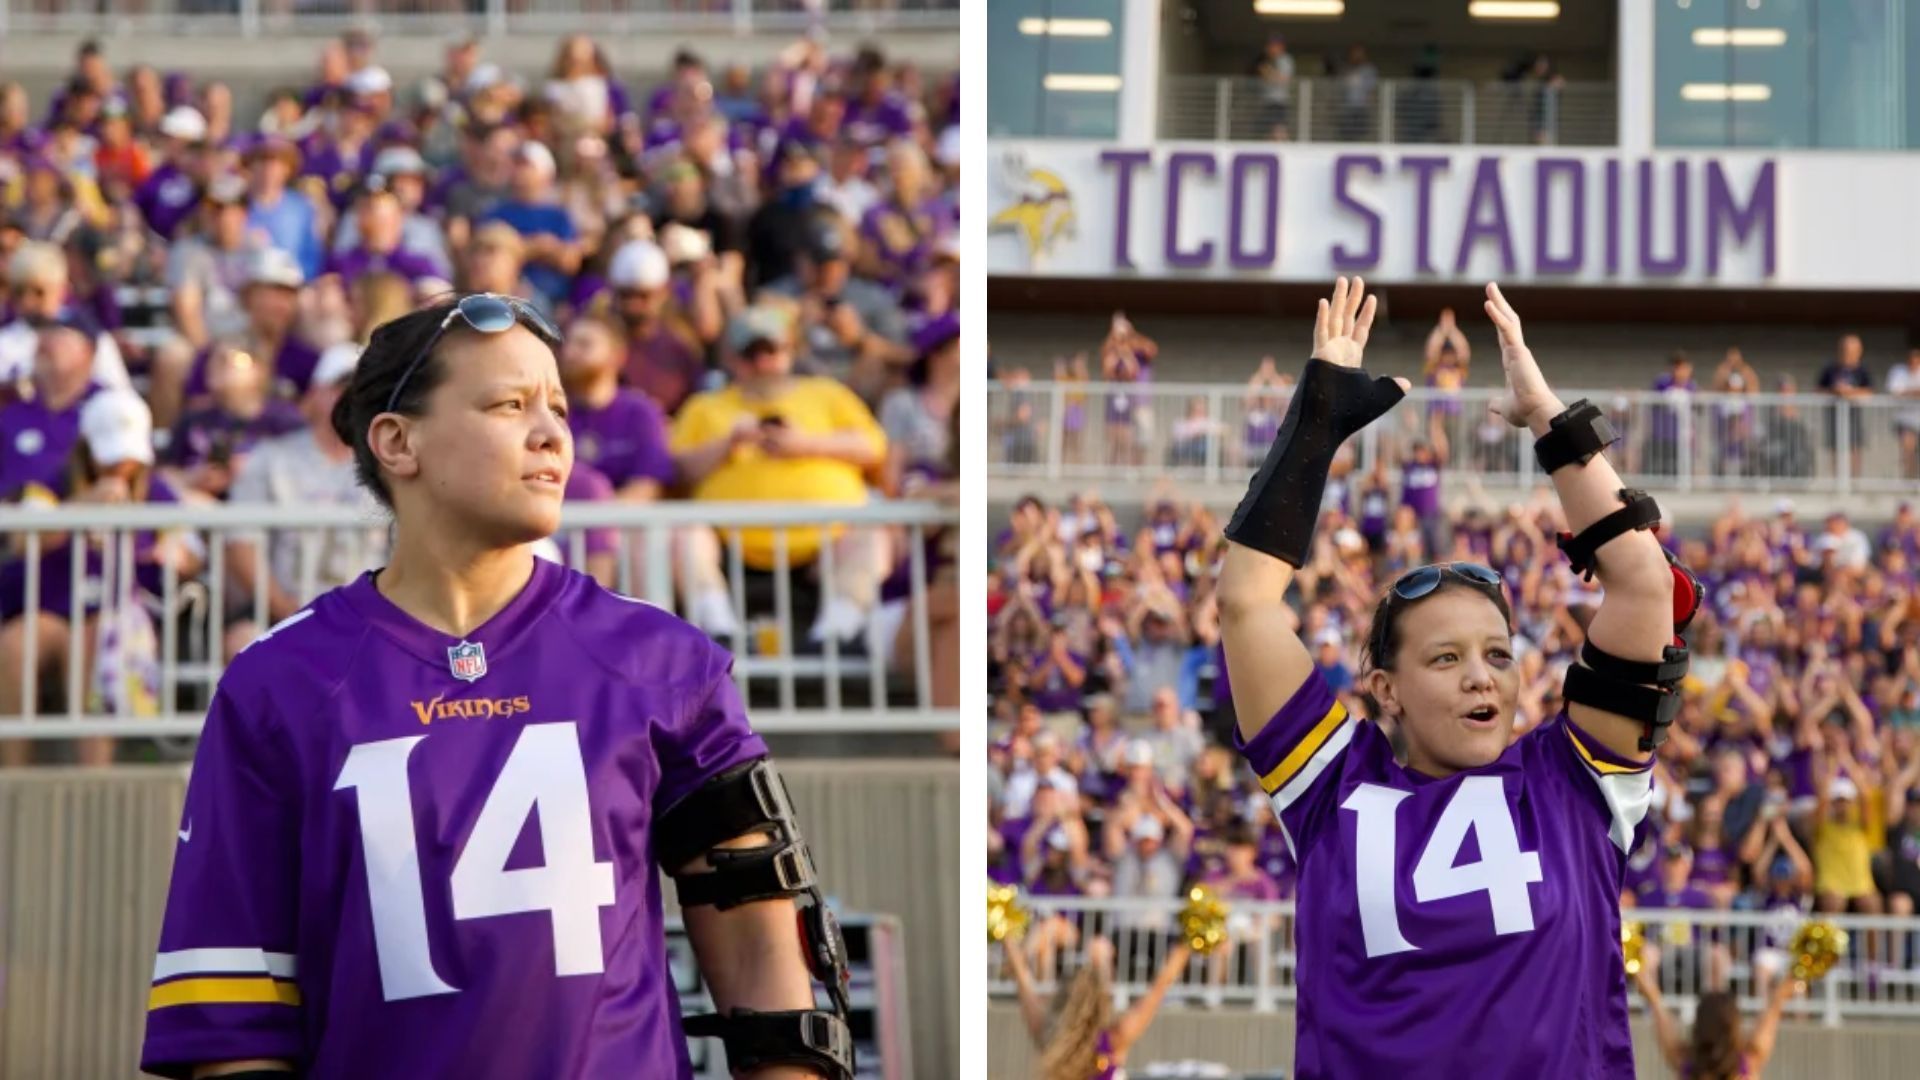 Shayna Baszler had a blast with her recent show with the Minnesota Vikings